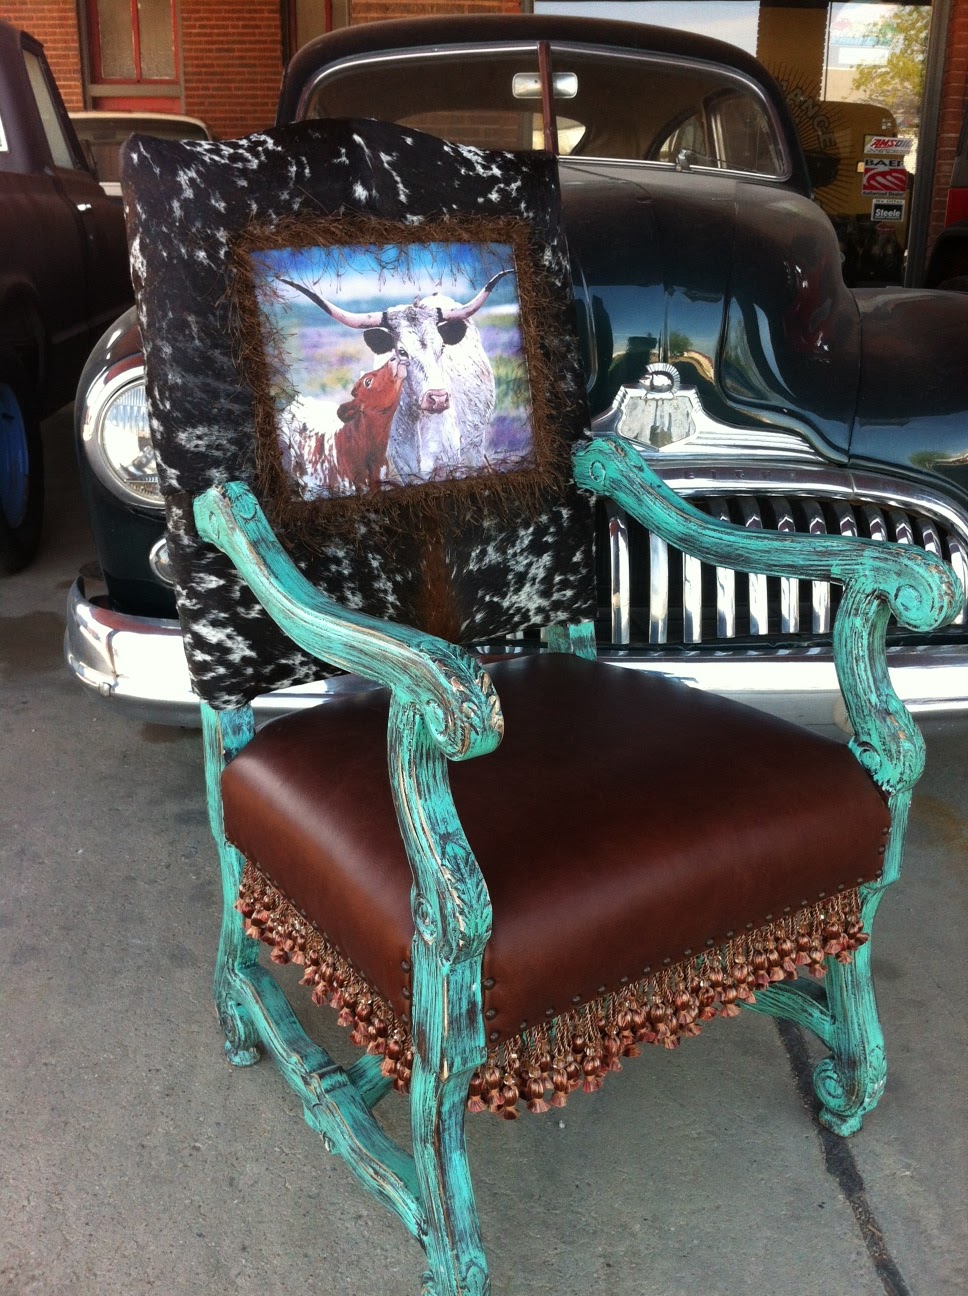 Rustic Ranch Decor & More | Airstream Boutique, 307 Reavis St, Valley View, TX 76272 | Phone: (972) 672-4999